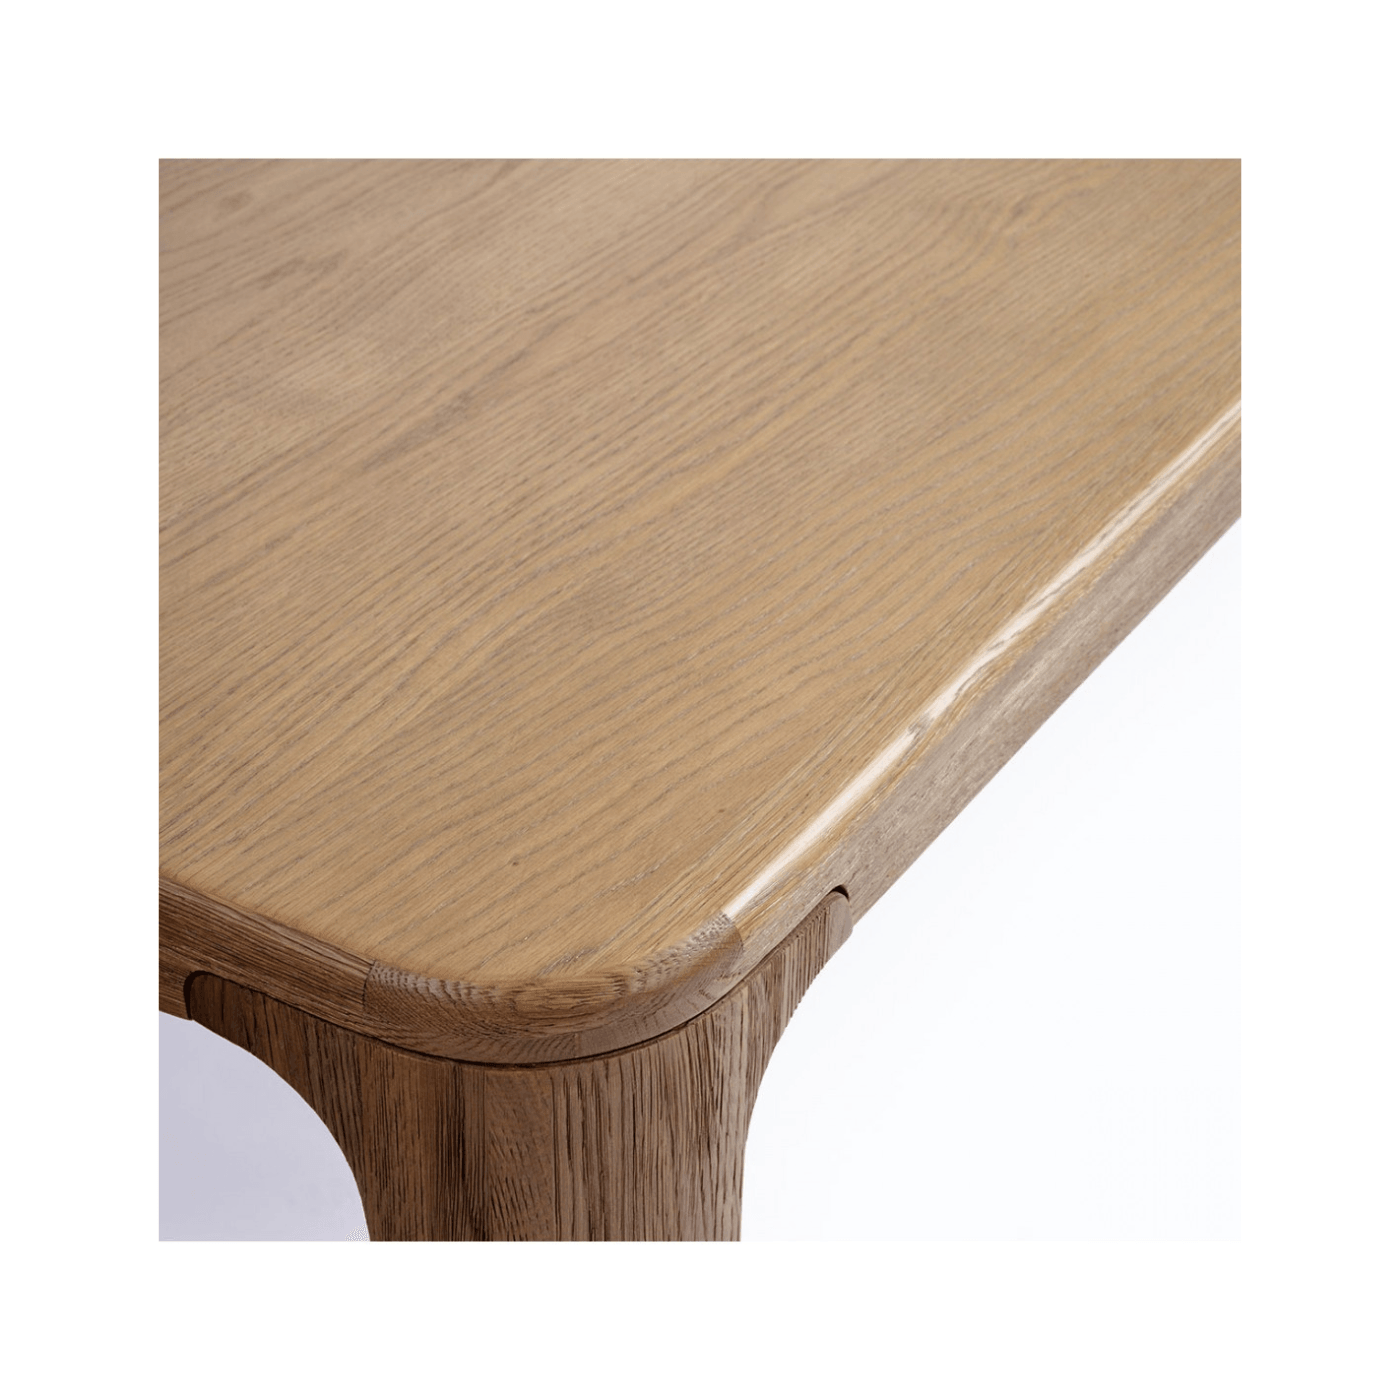 Budapest Natural Oak Wood Rectangular Dining Table with Rounded Corners - Maison Rêves UK